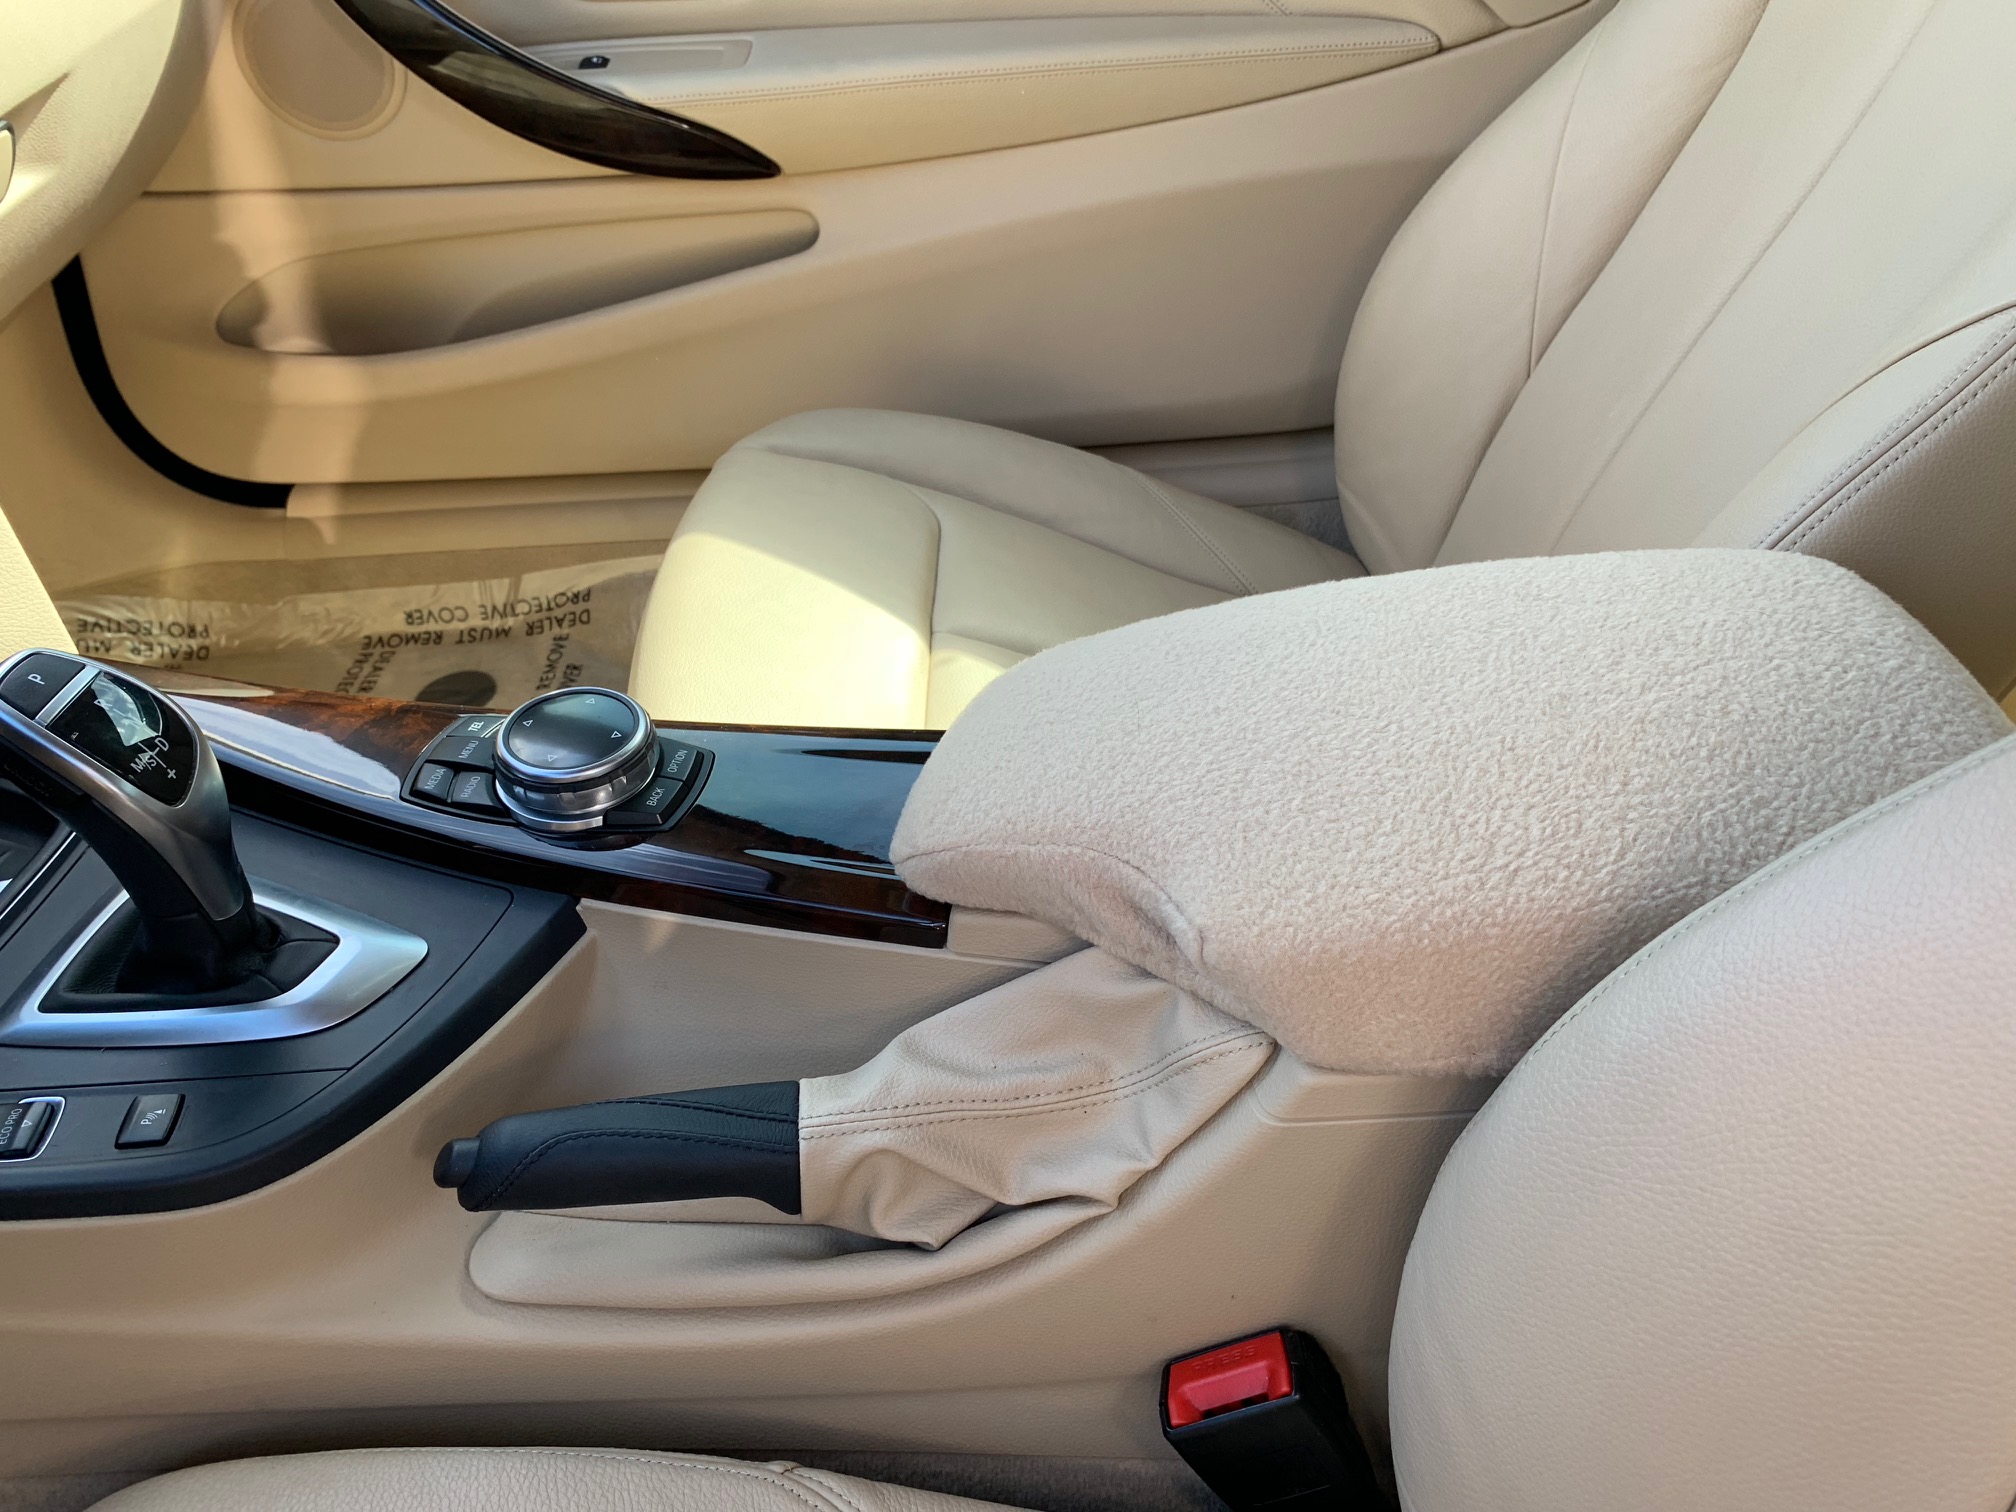 Buy Fleece Center Armrest Console Cover fits the BMW 4 Series 2015-2019 (All Trim Levels)